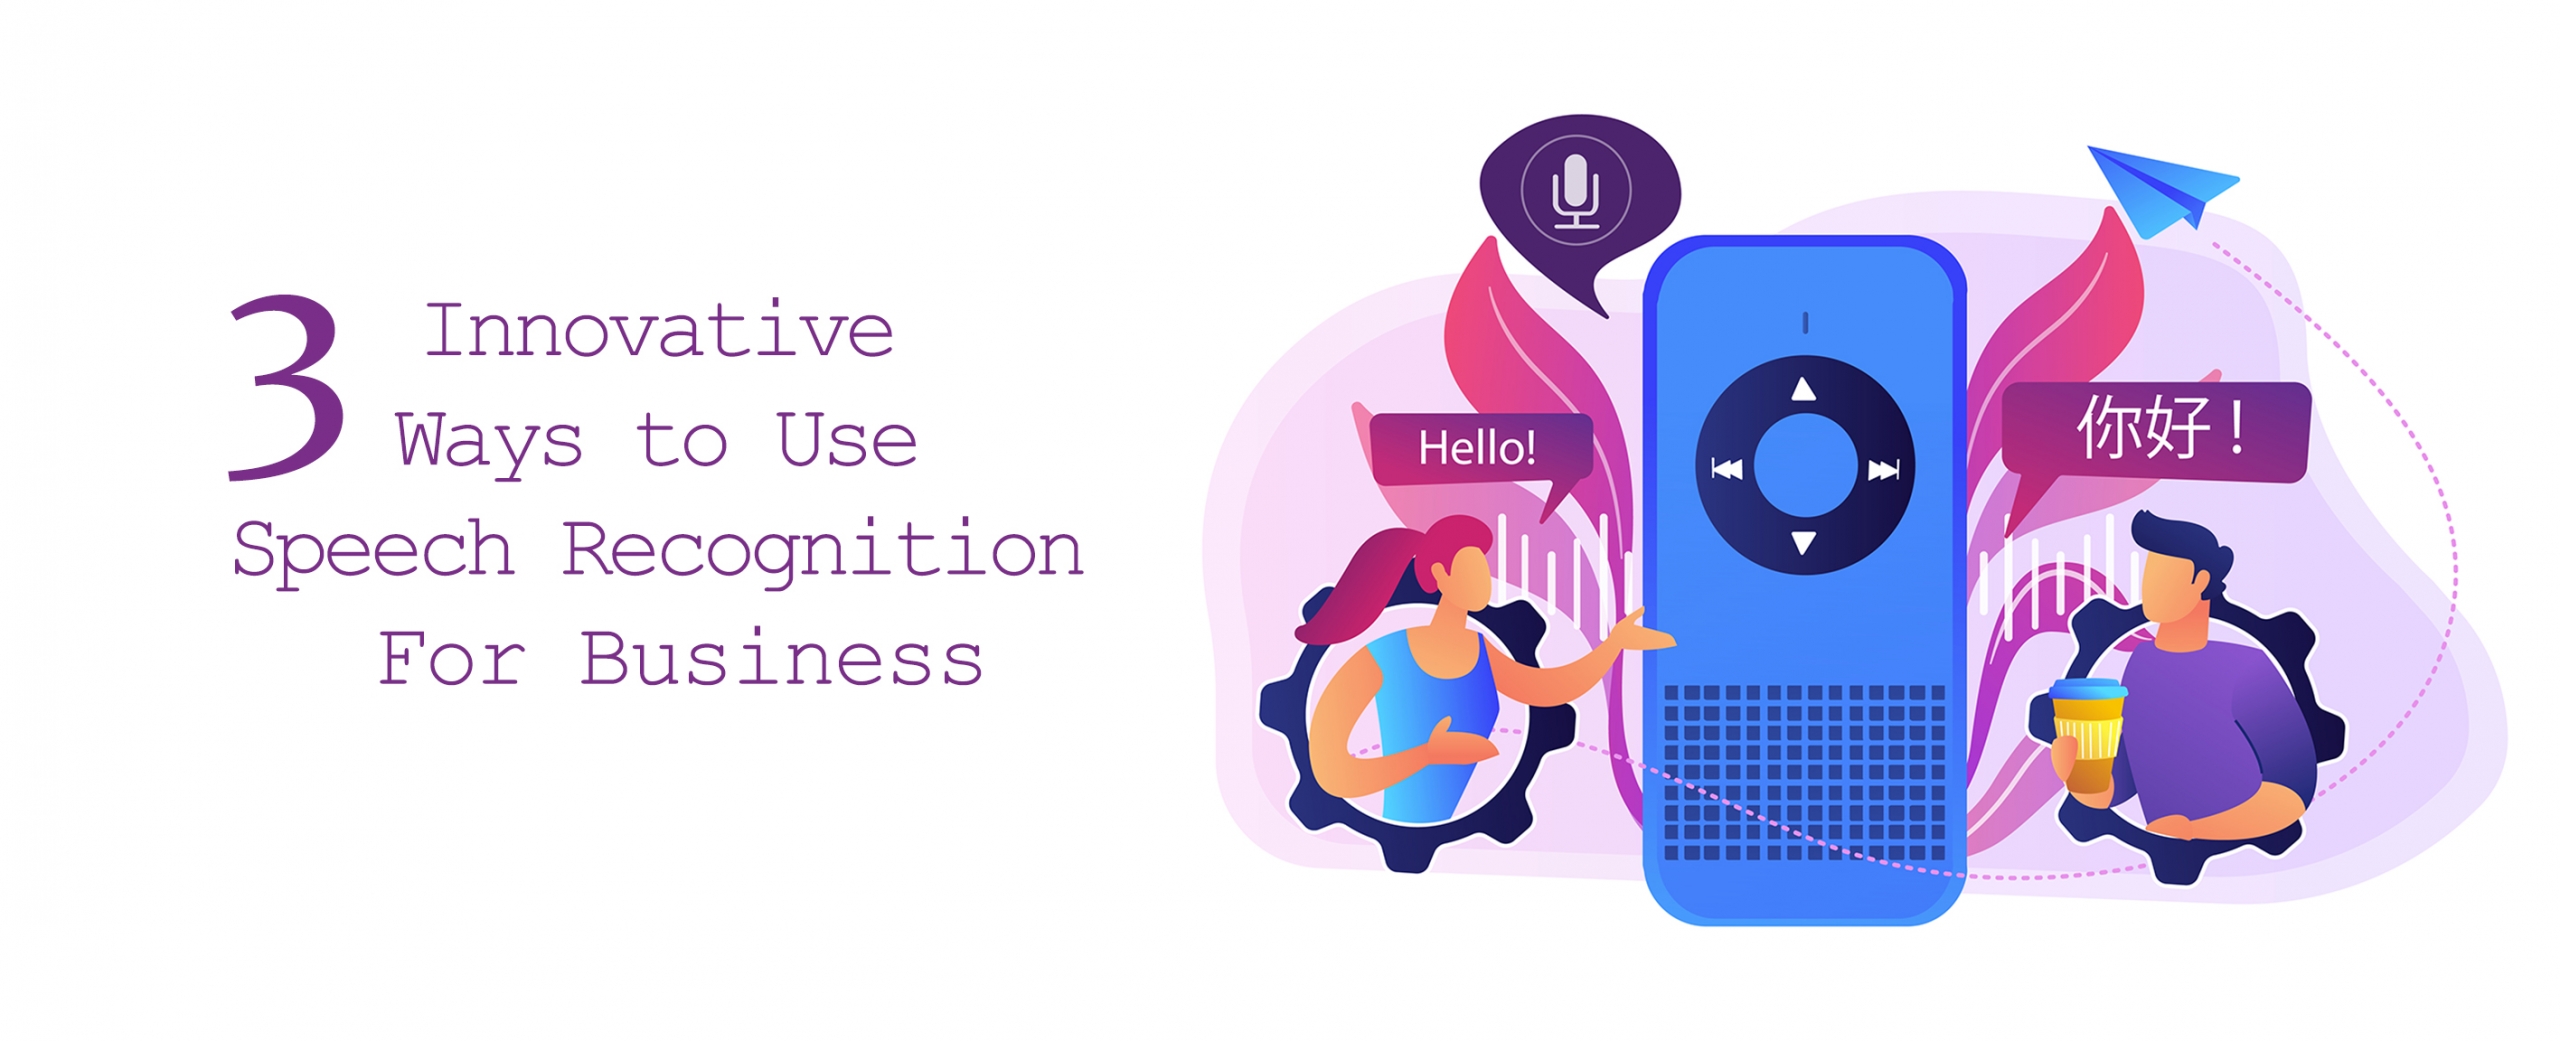 3 innovative ways to use speech recognition for business